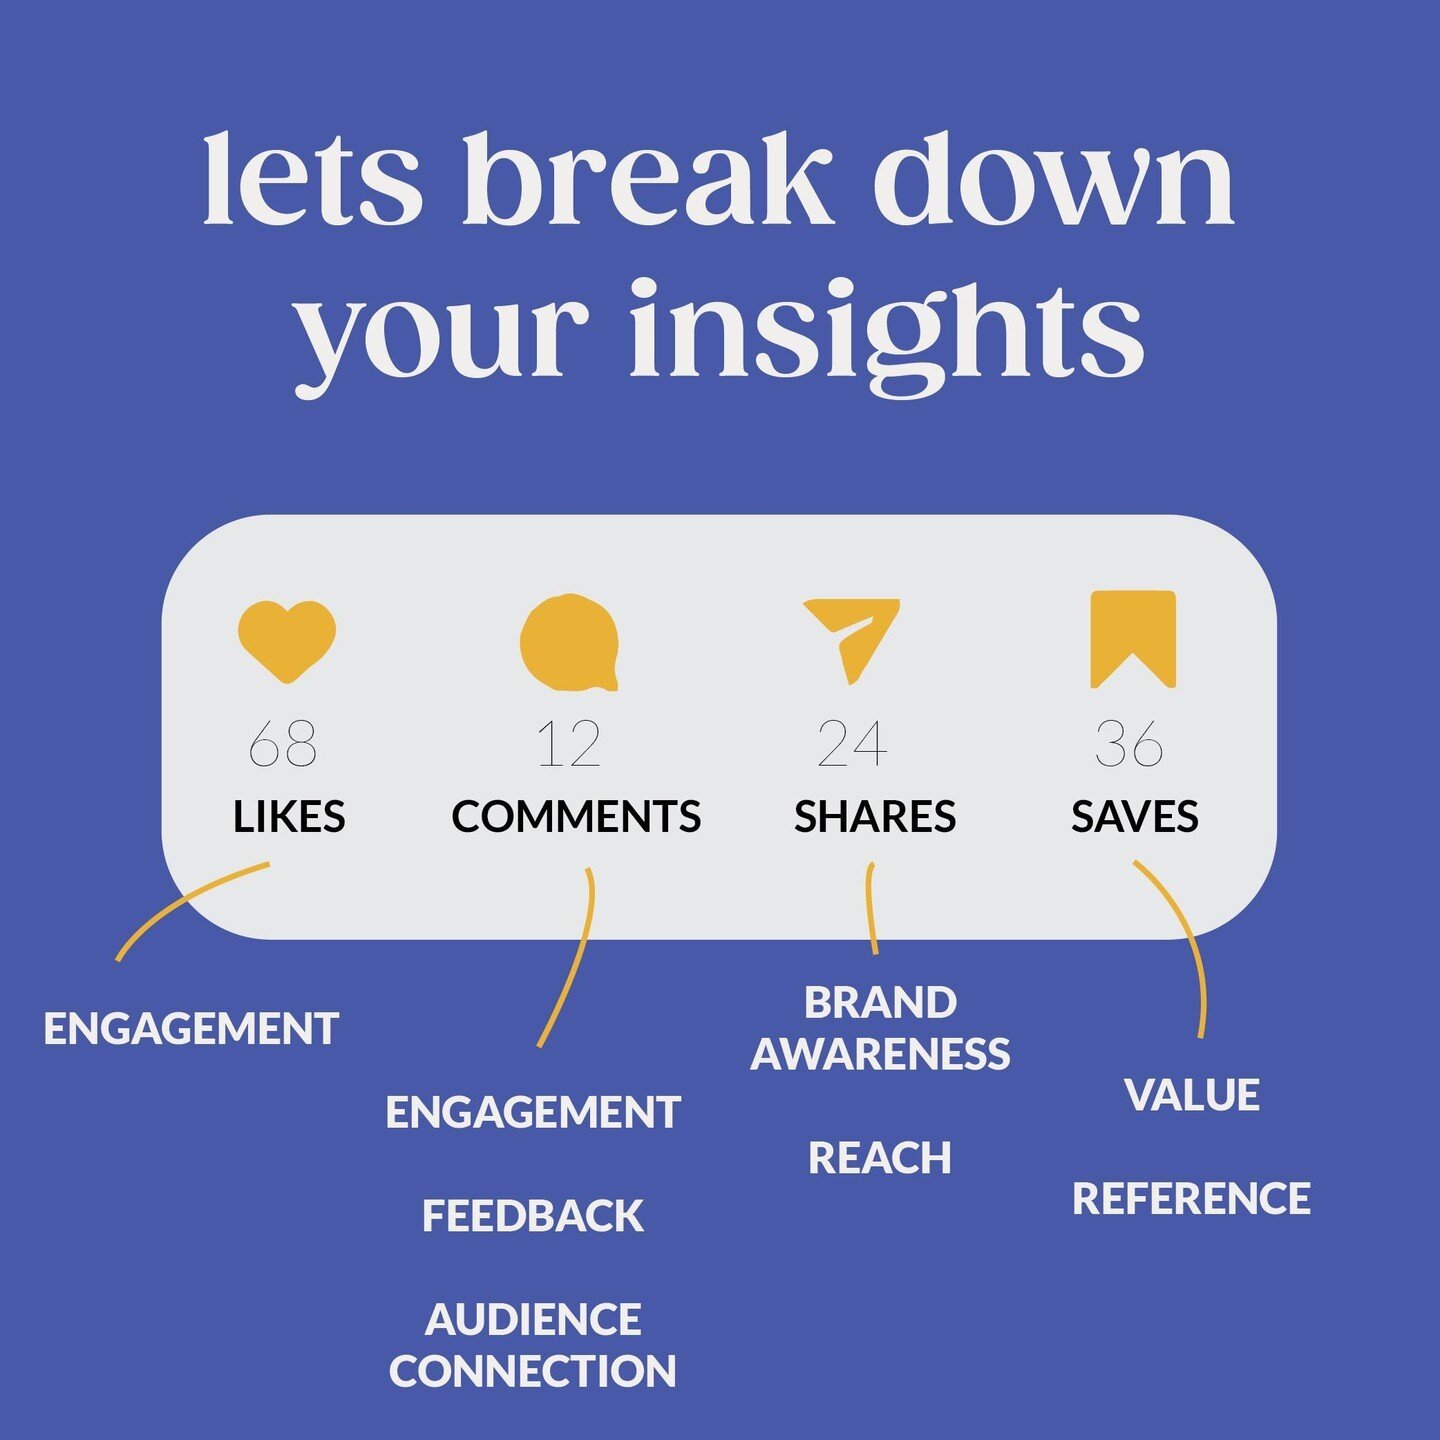 All engagement is good engagement (for the most part), but let's break it down into its specifics and what to target to achieve different results.....⁠
⁠
💛 LIKES⁠
The more people that like your post, the more Instagram will push the post. It is a us